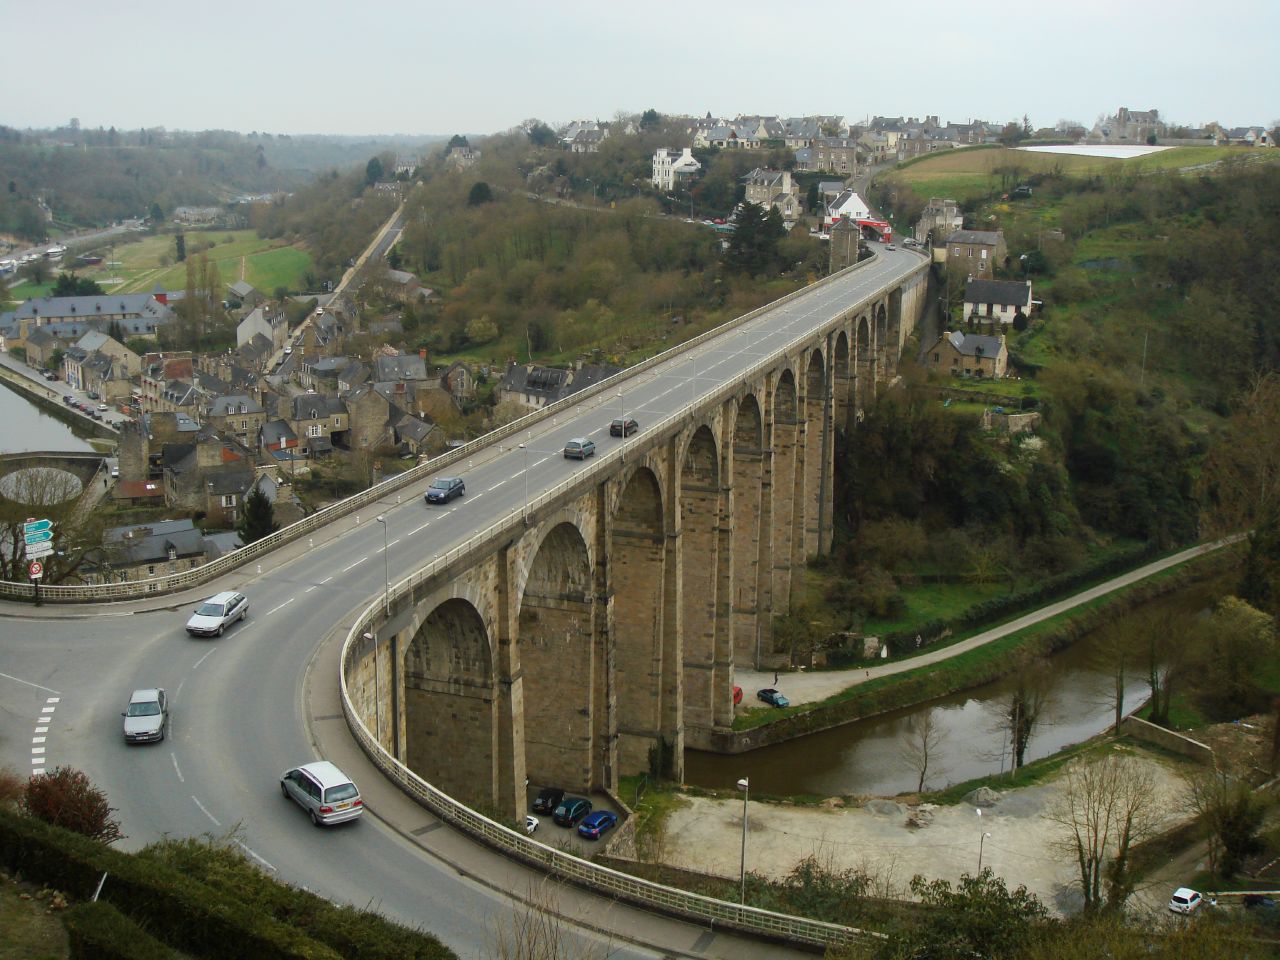 a bridge spanning over a highway, with cars driving on it